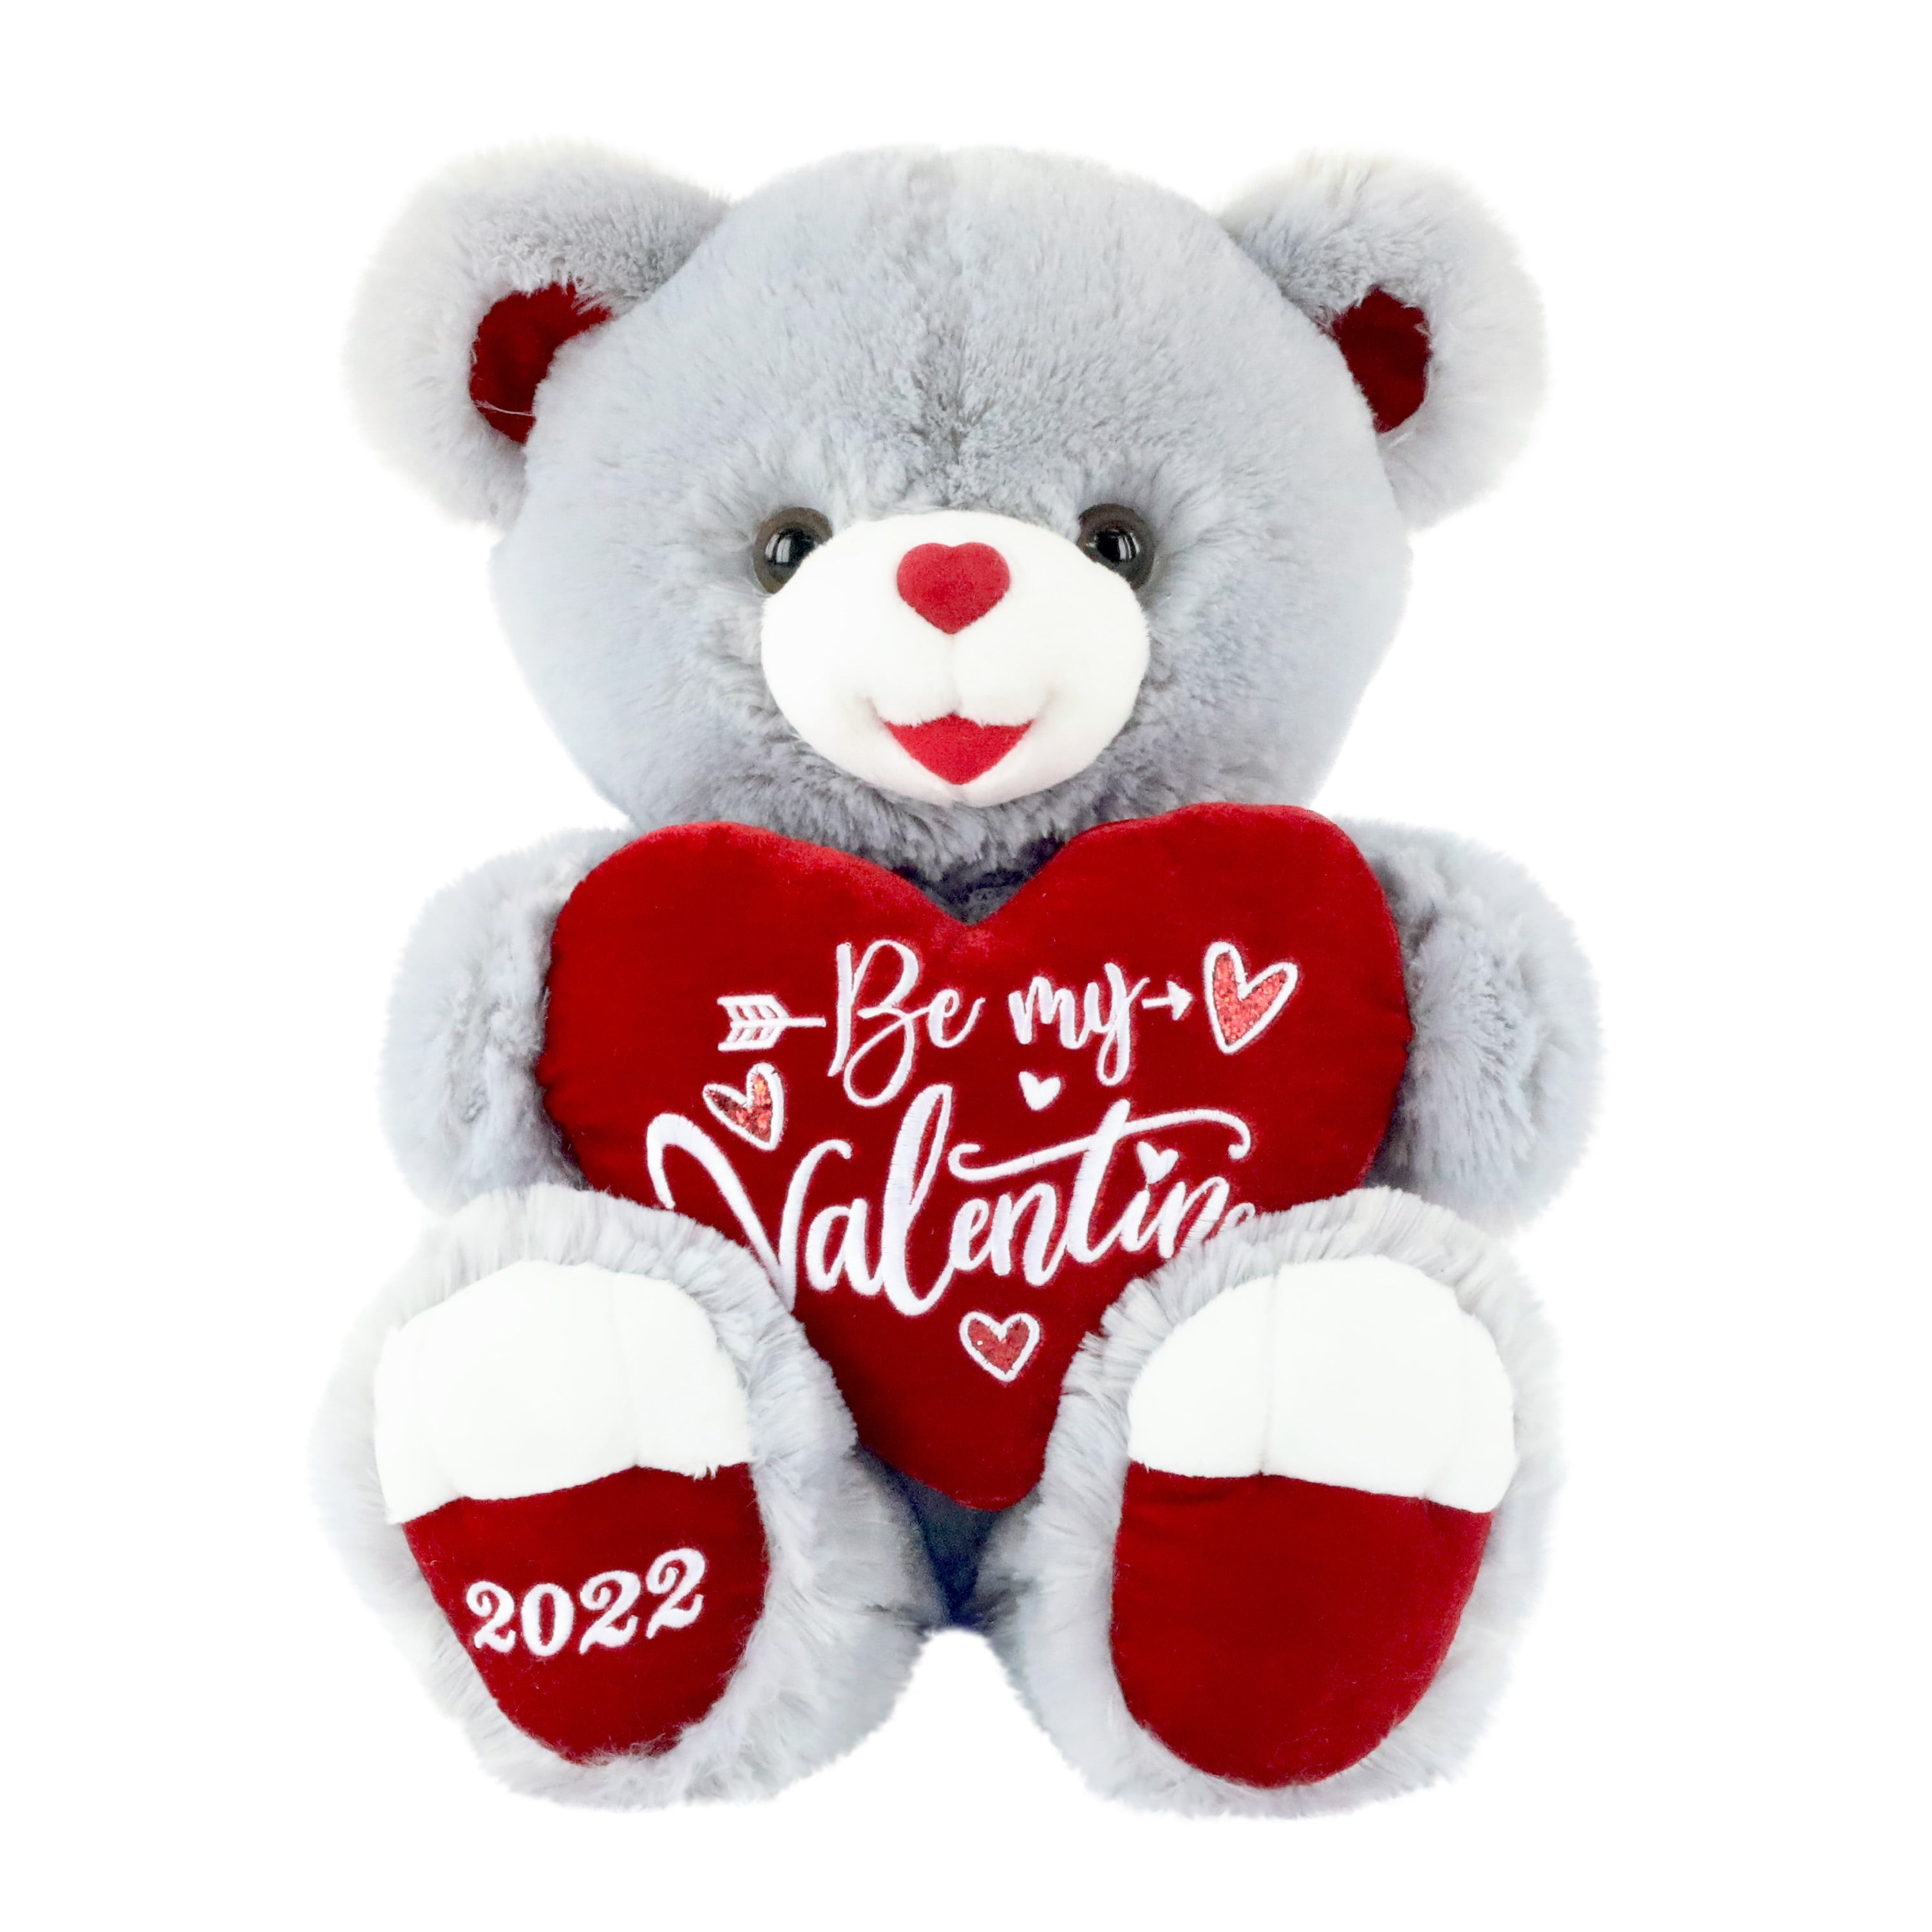 Ty Beanie Boo Cuddly Bear W/tags 36176 for 2016 Valentines Day Gift MINT for sale online 